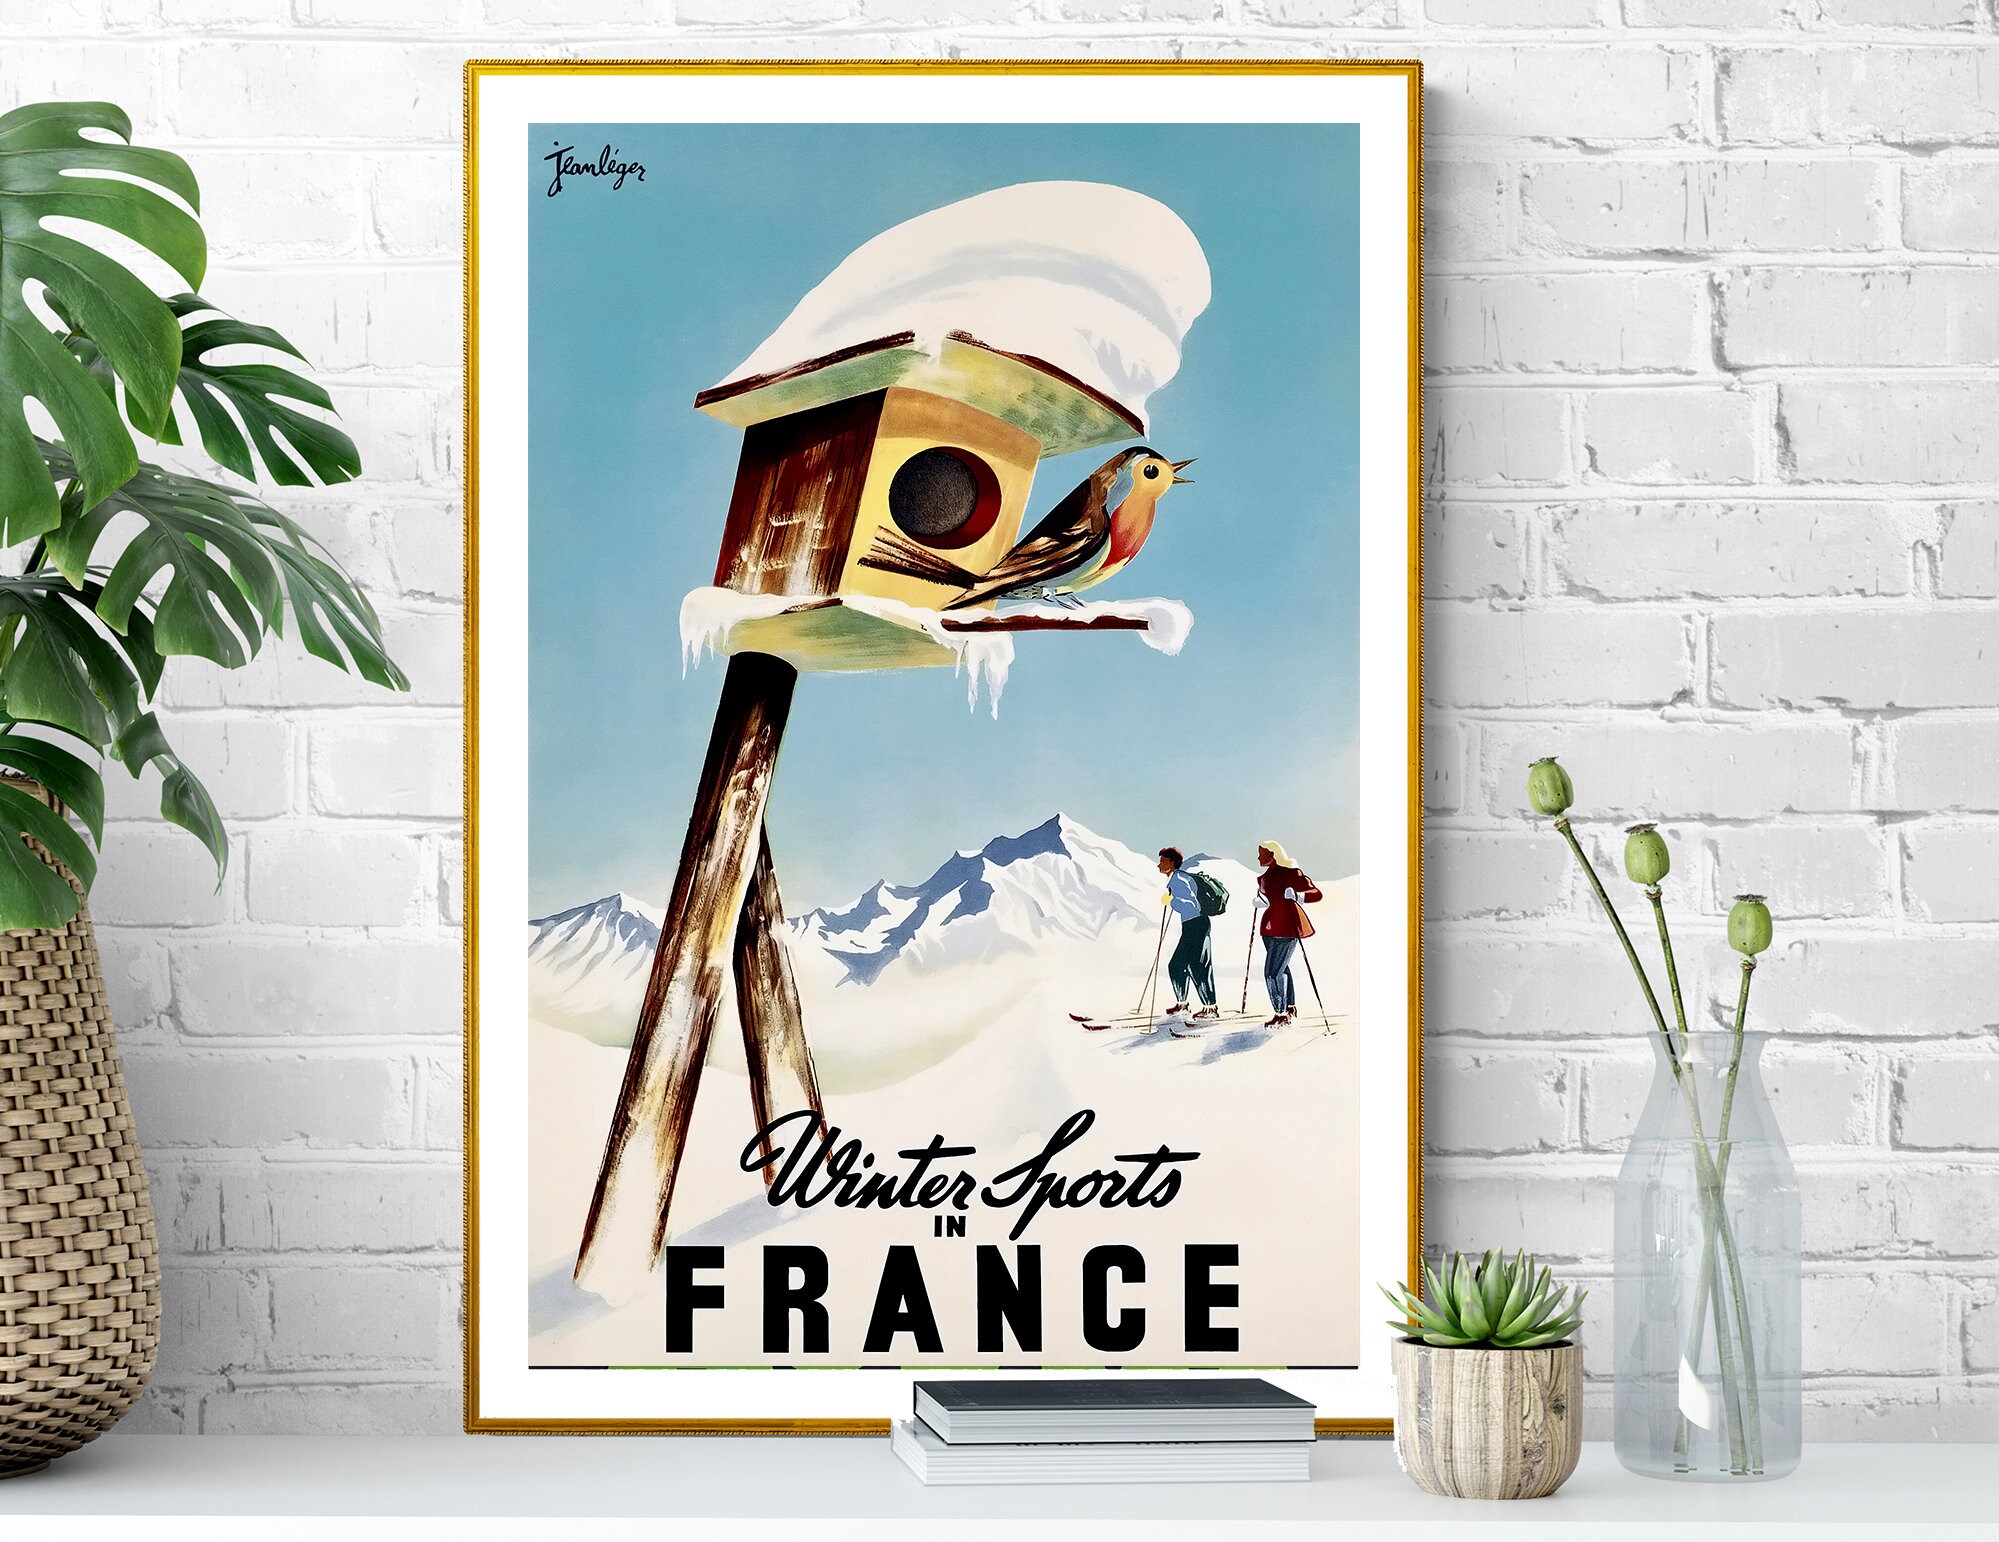 Details about   Ski In France 1940 Winter Sports Vintage Poster Print Retro Style Wall Art 